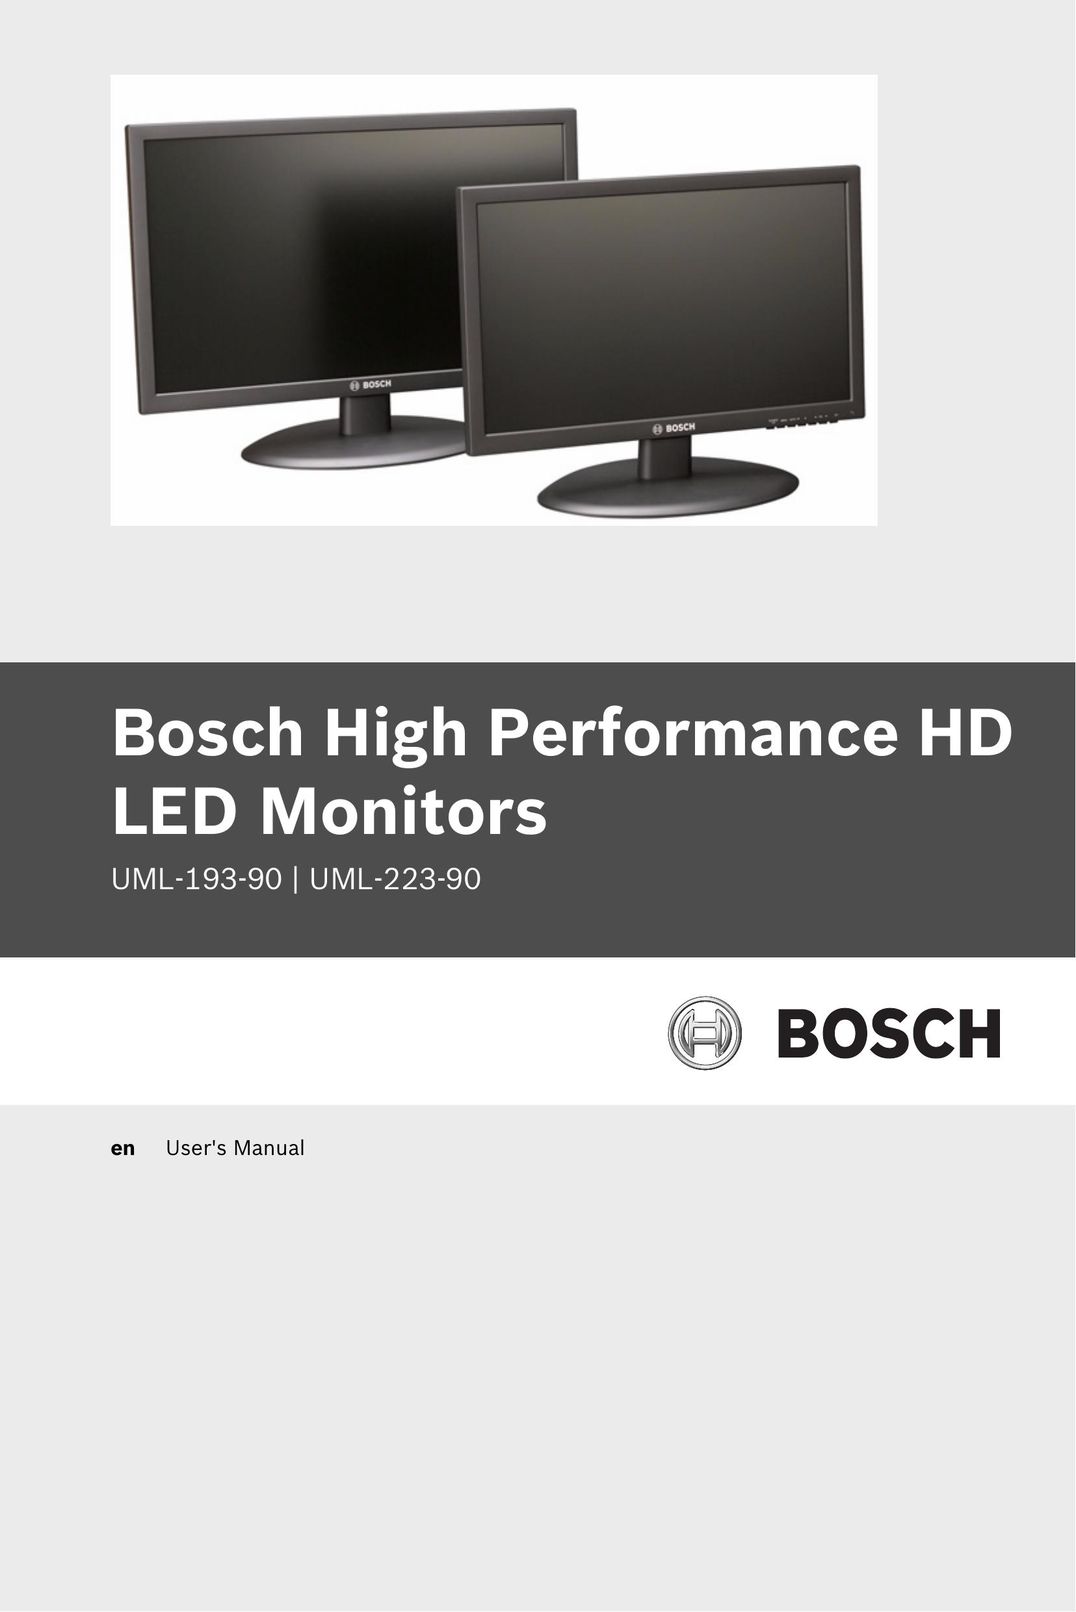 Bosch Appliances UML-223-90 Computer Monitor User Manual (Page 1)